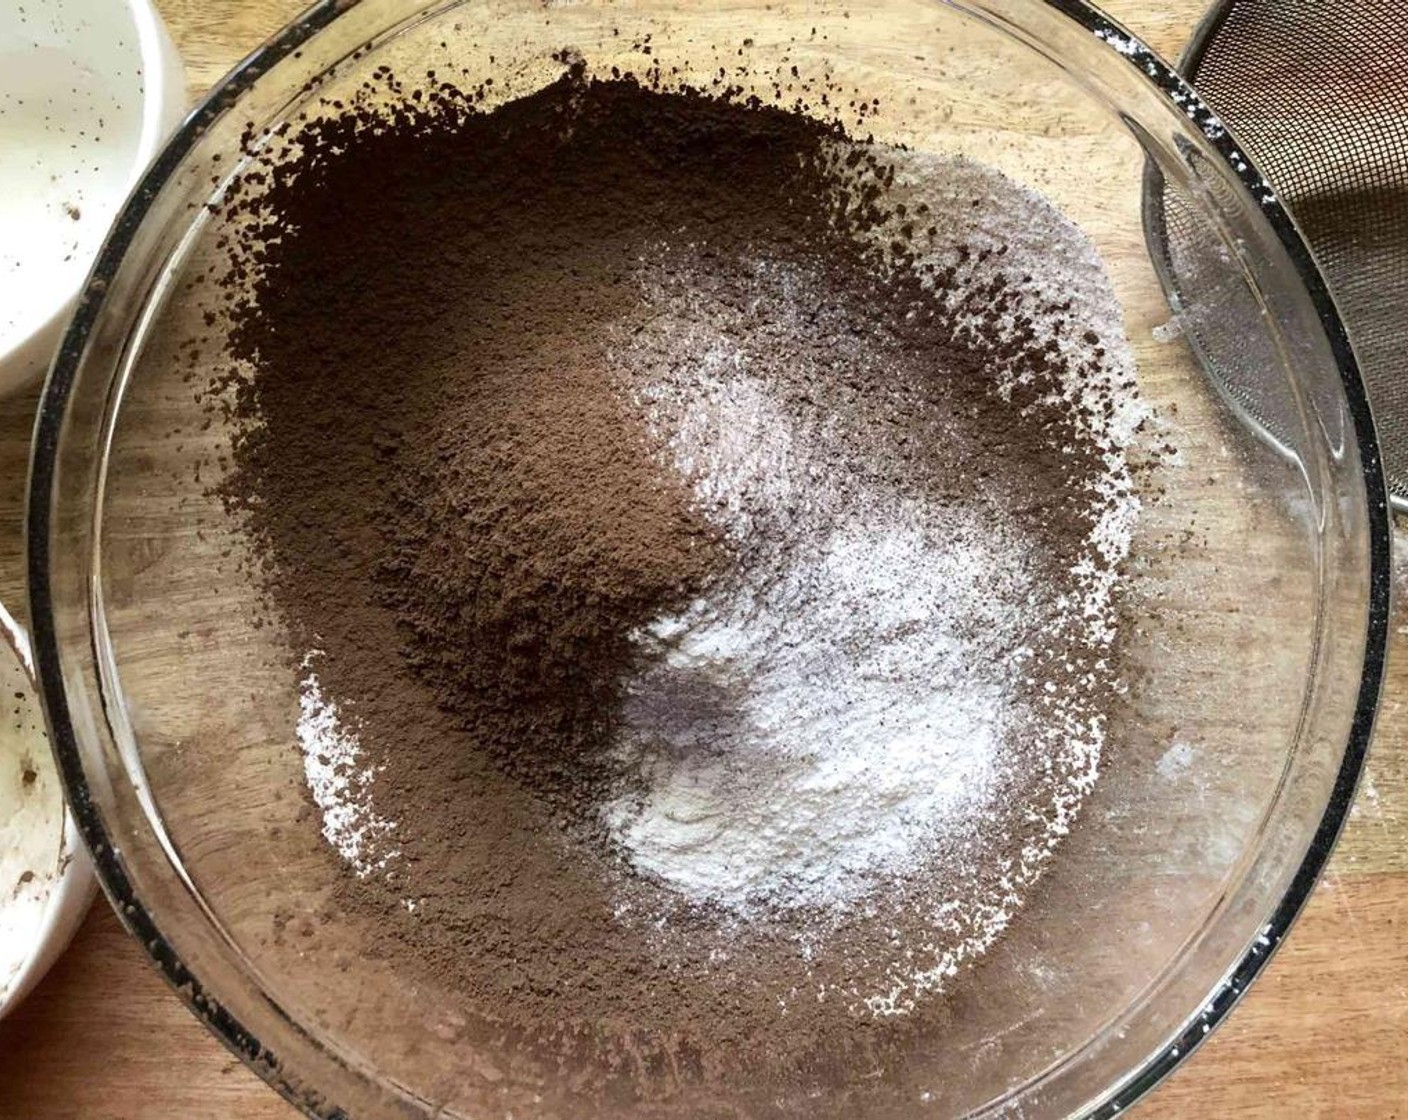 step 3 In a large bowl, sift together the Gluten-Free All-Purpose Flour (1 cup), Unsweetened Cocoa Powder (1/2 cup), Baking Soda (3/4 tsp) and Baking Powder (1/4 tsp).